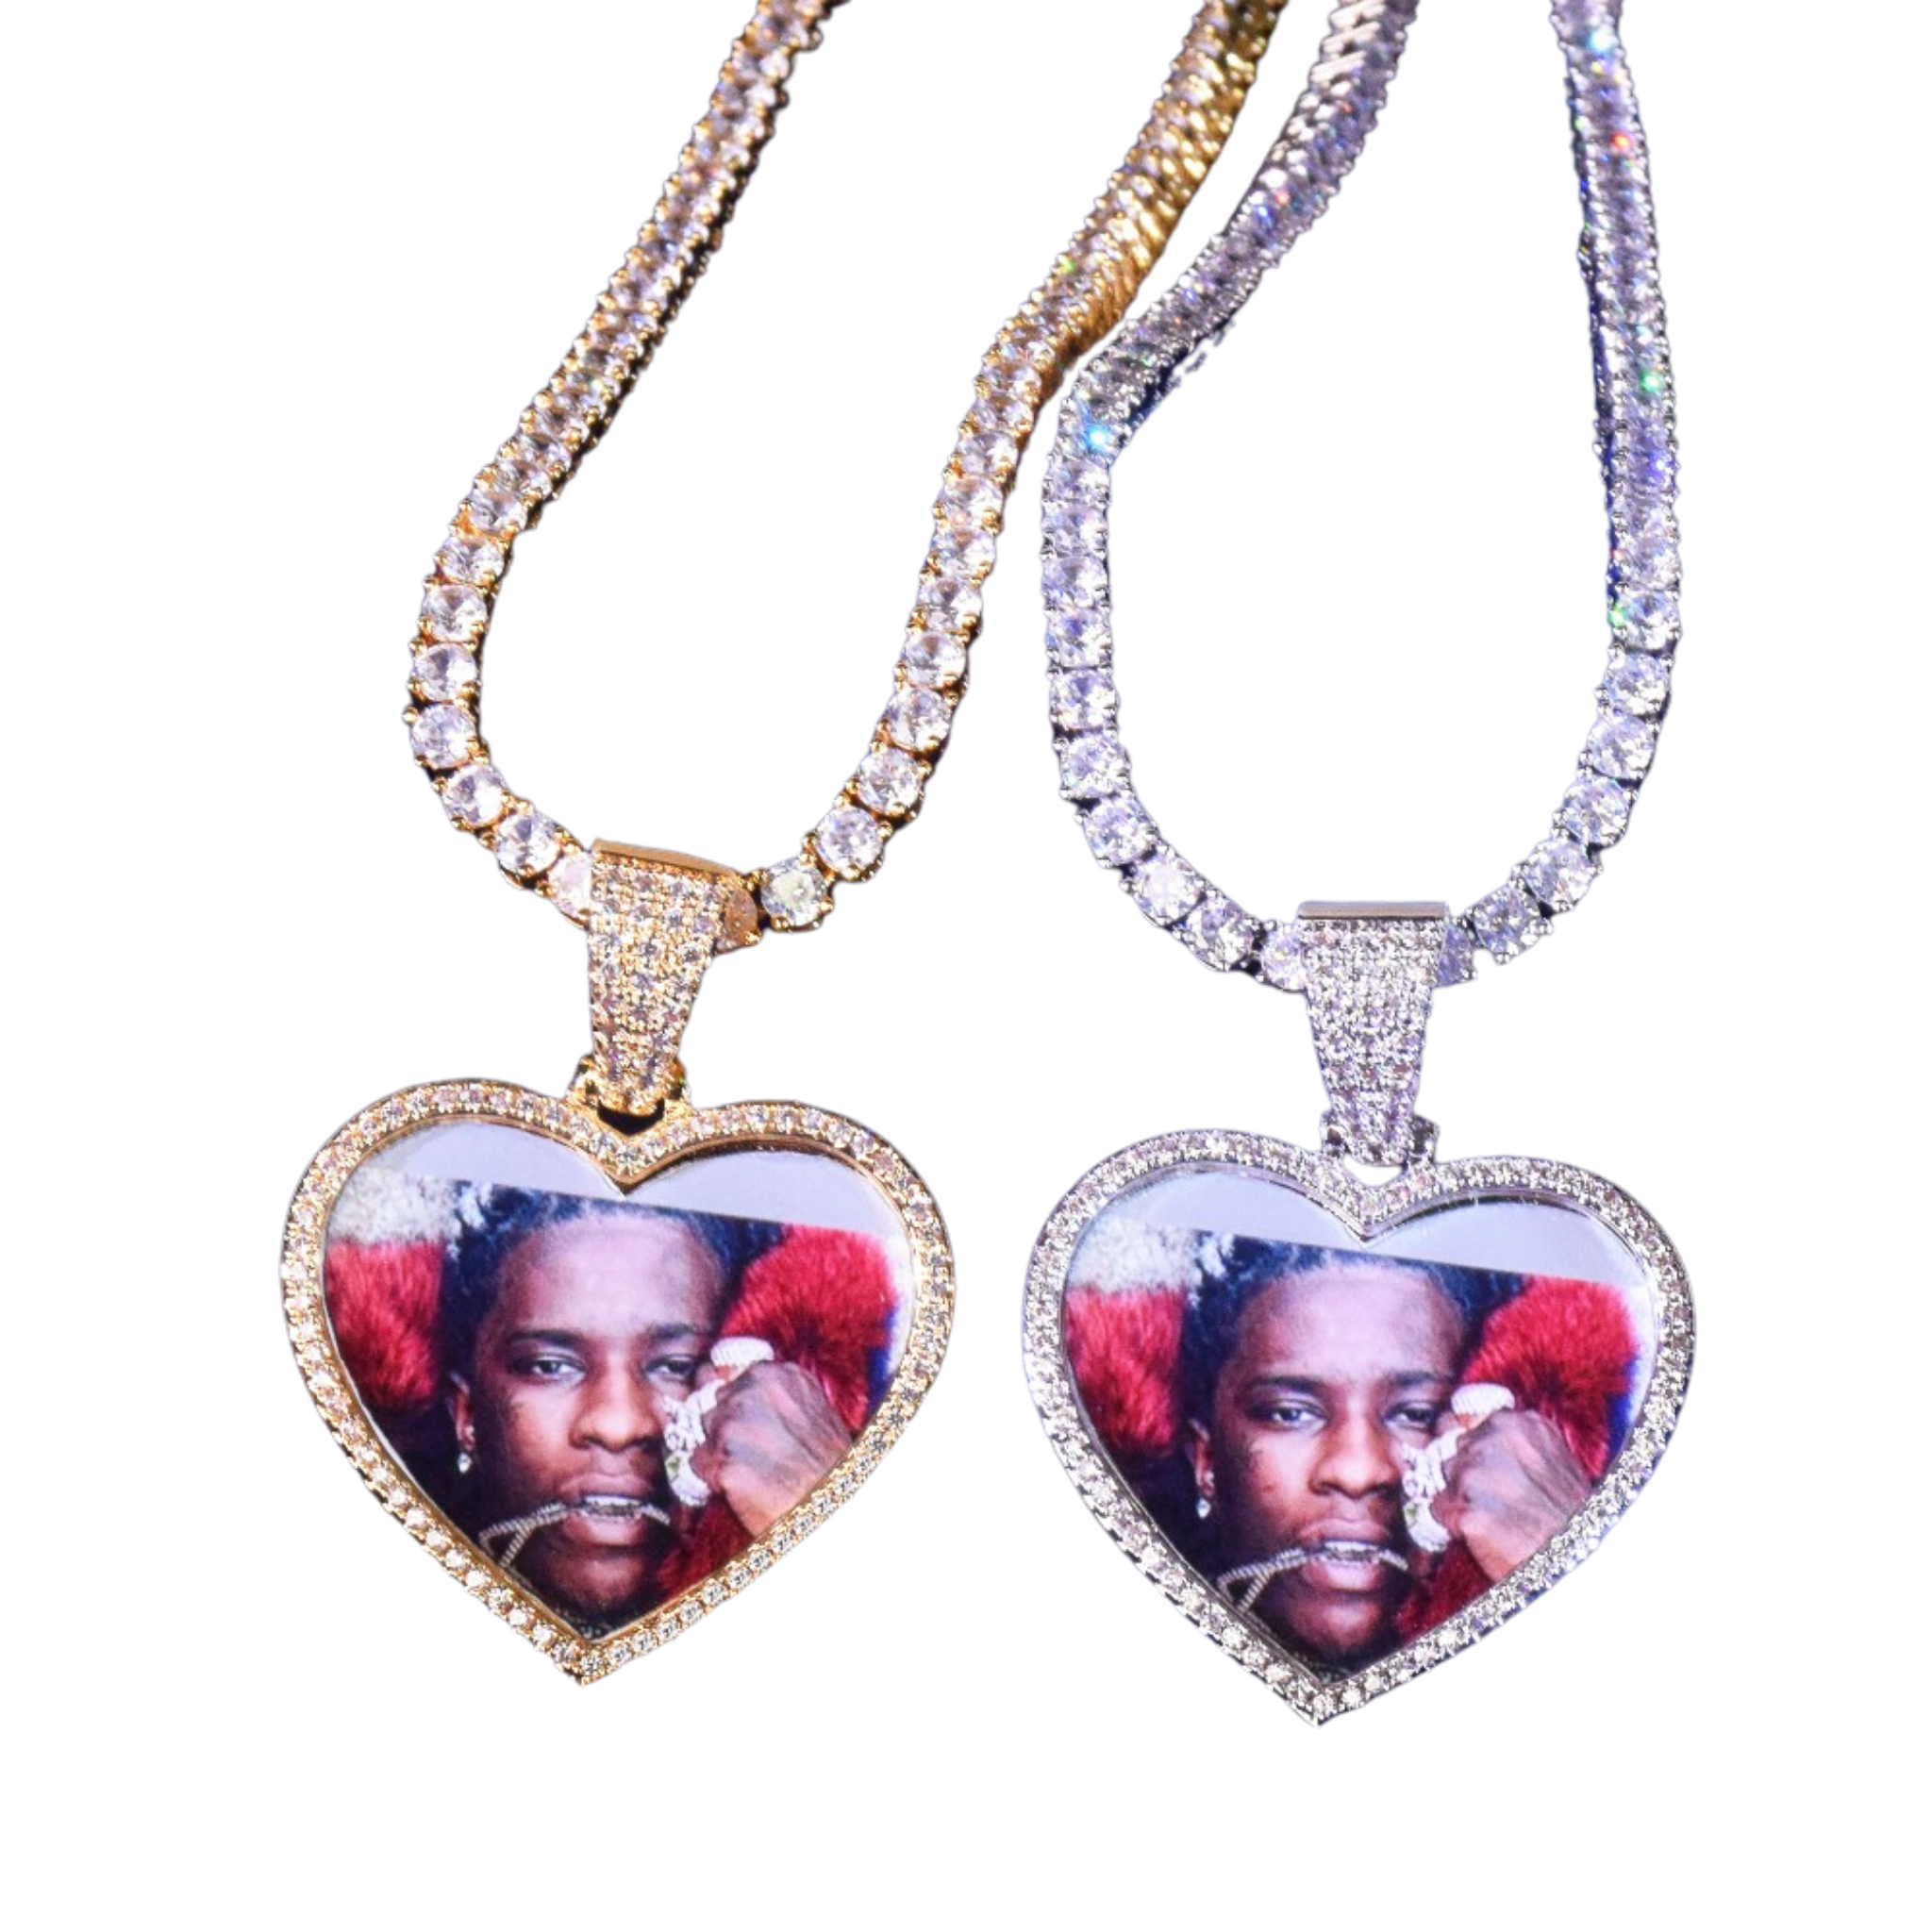 Drip Heart Style Tennis Bail Solid Back Custom Photo Pendant Necklace